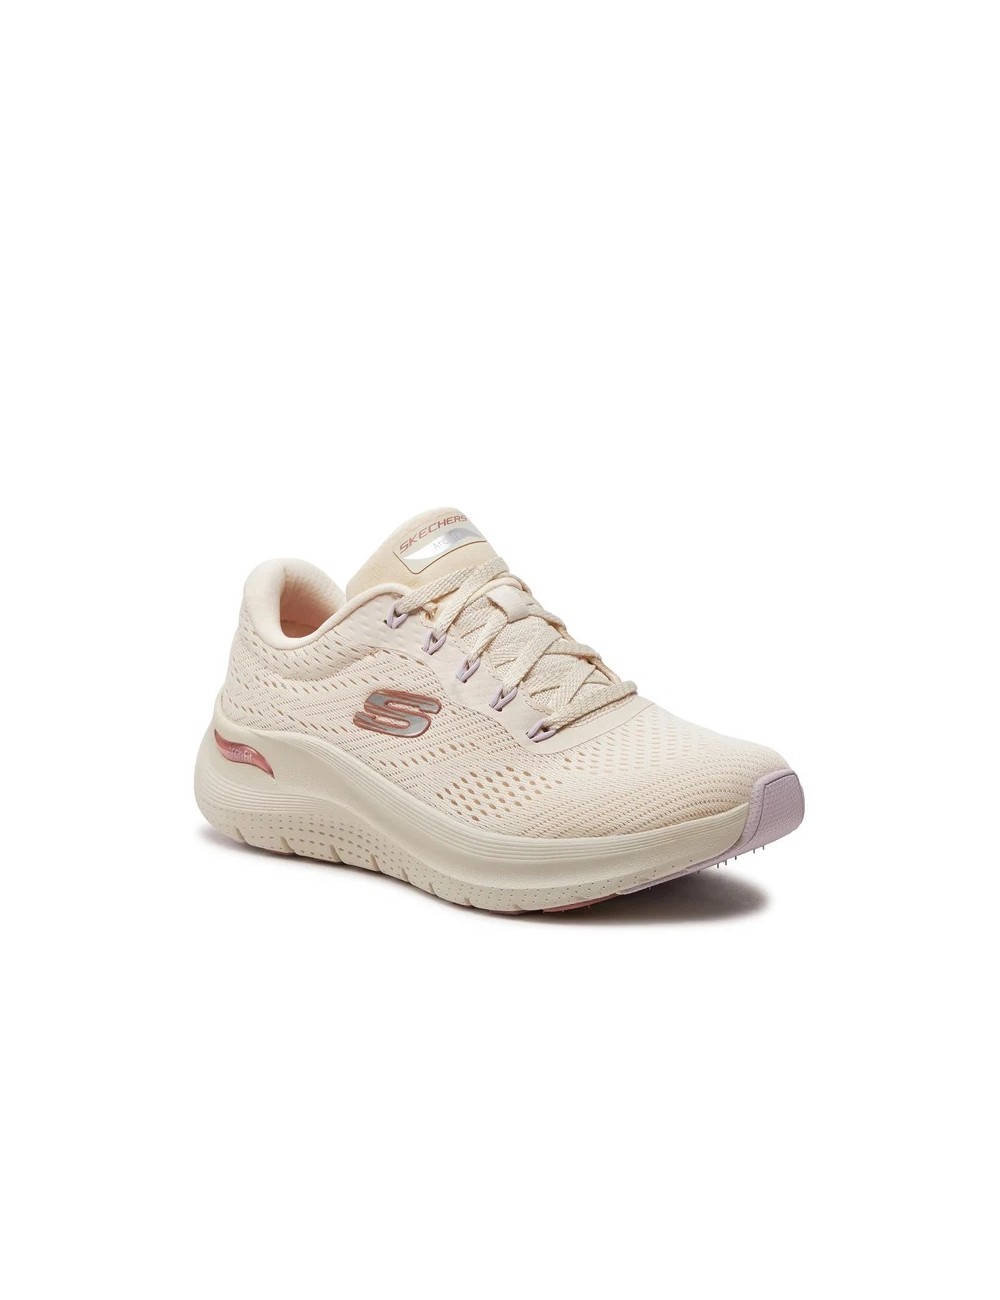 Arch Fit mujer beige